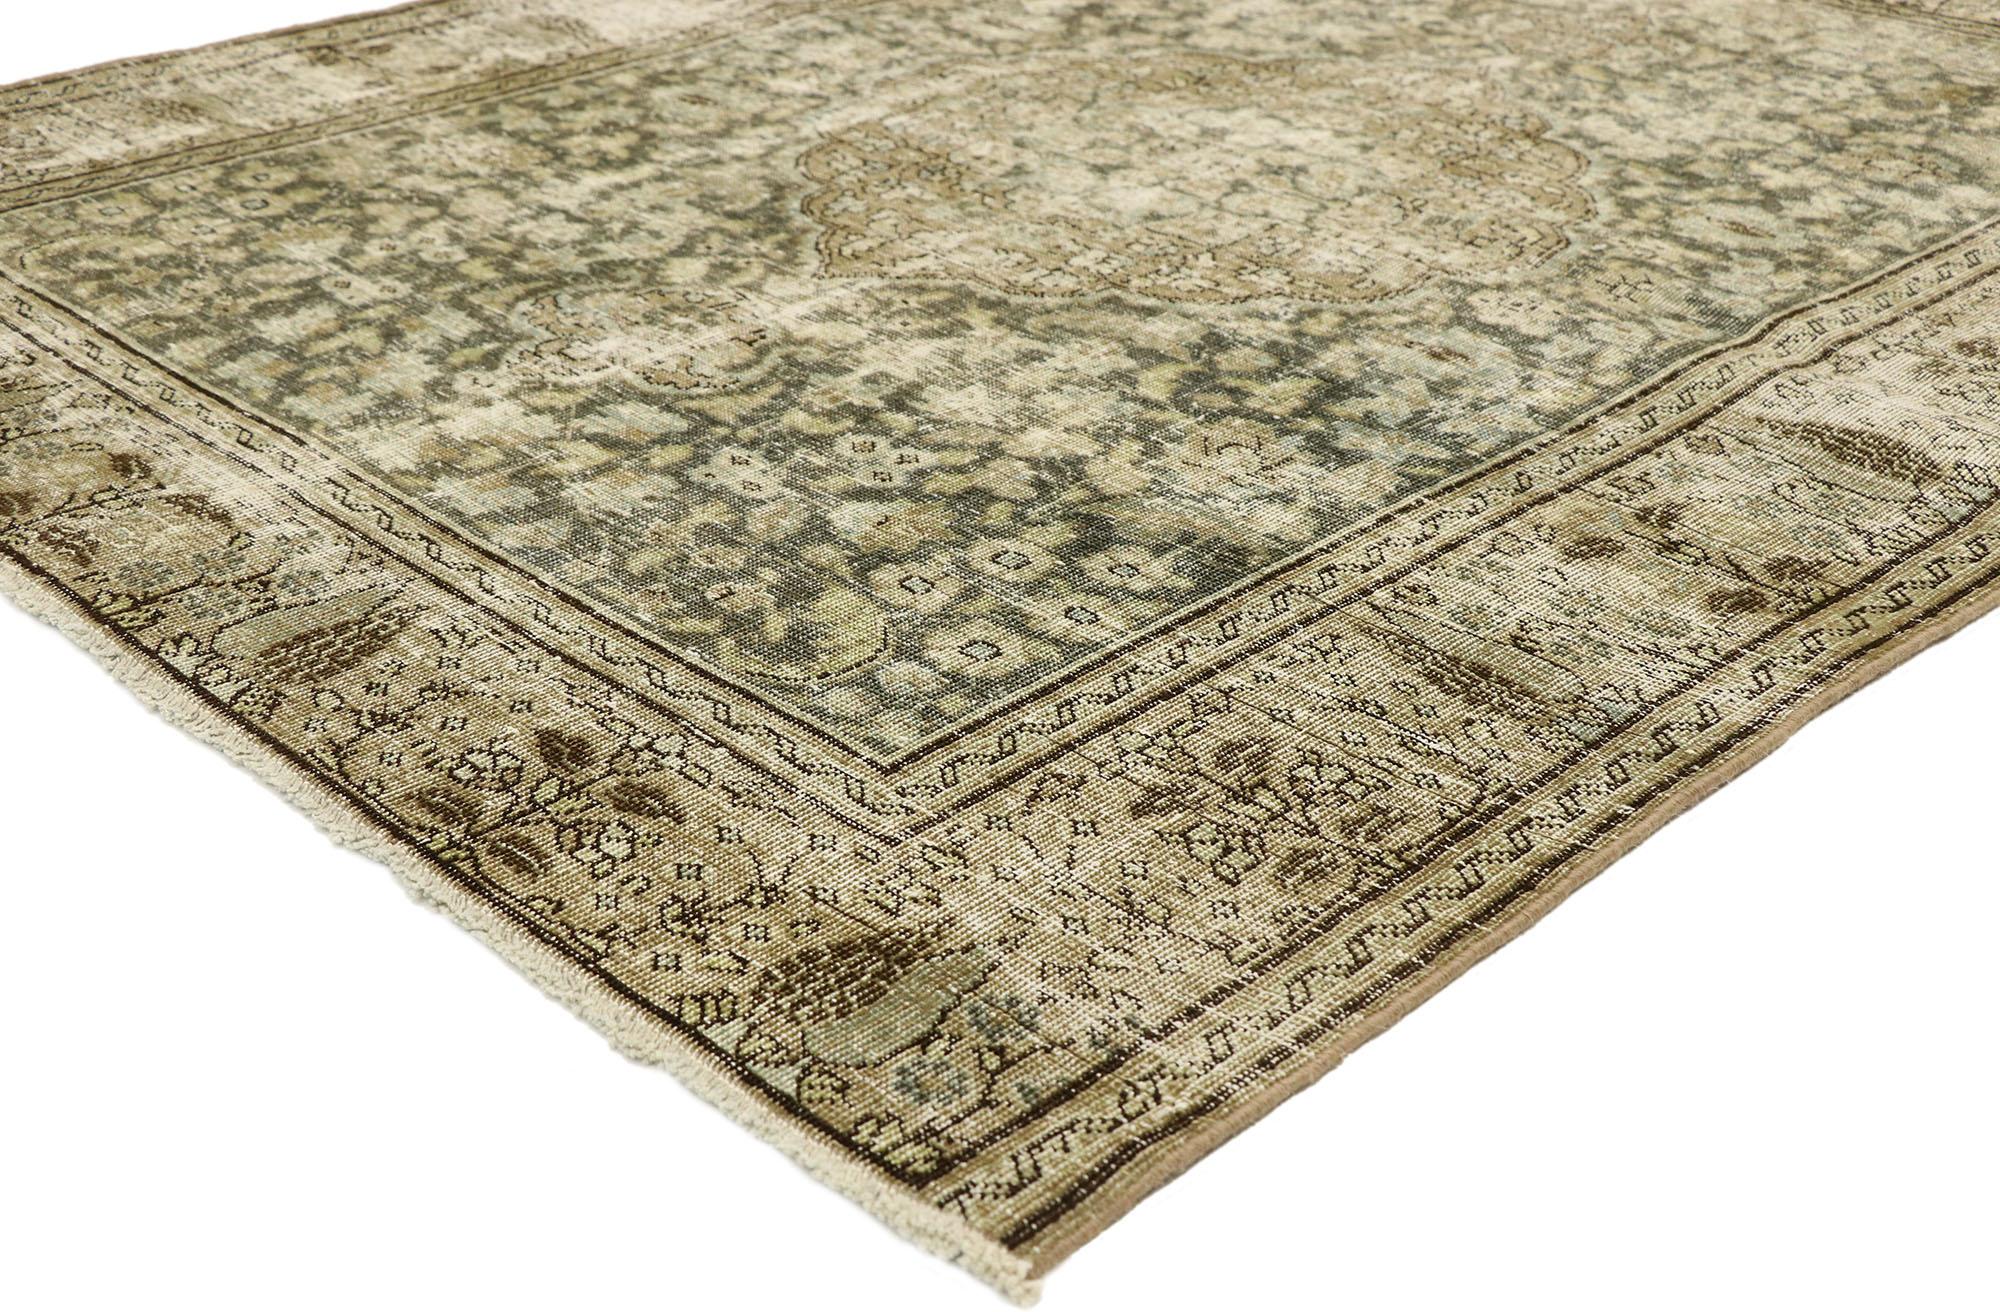 51531, distressed antique Persian Tabriz rug with Modern Industrial style. With the harmony of an extremely mature and subdued color palette of color and lovingly time-worn composition, this hand knotted wool distressed antique Persian Tabriz rug